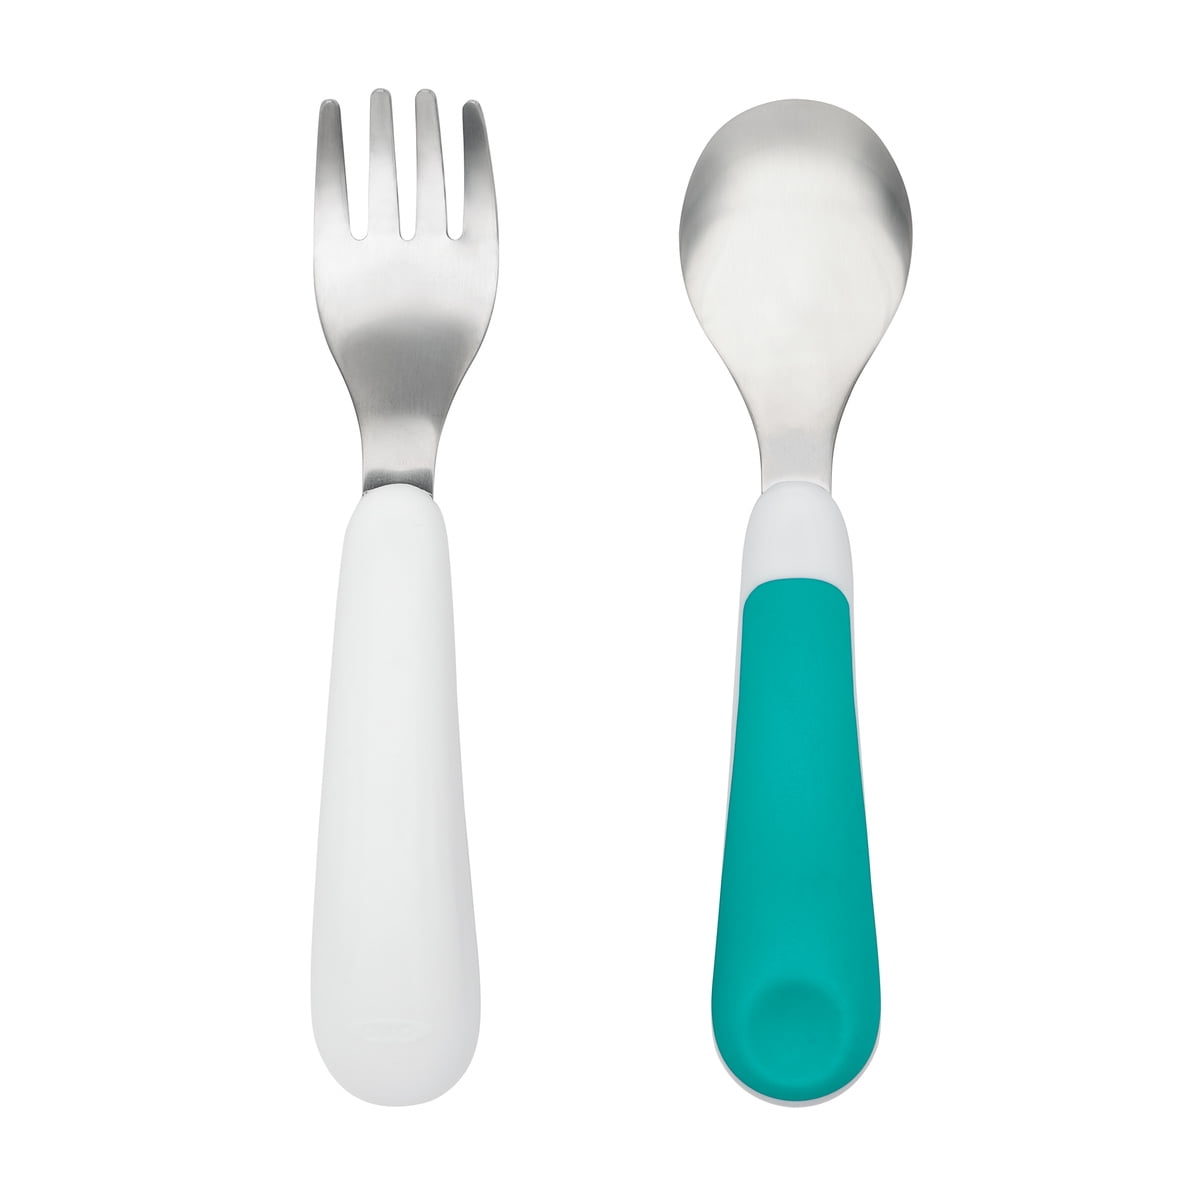 OXO Tot Silicone Spoon Set Teal